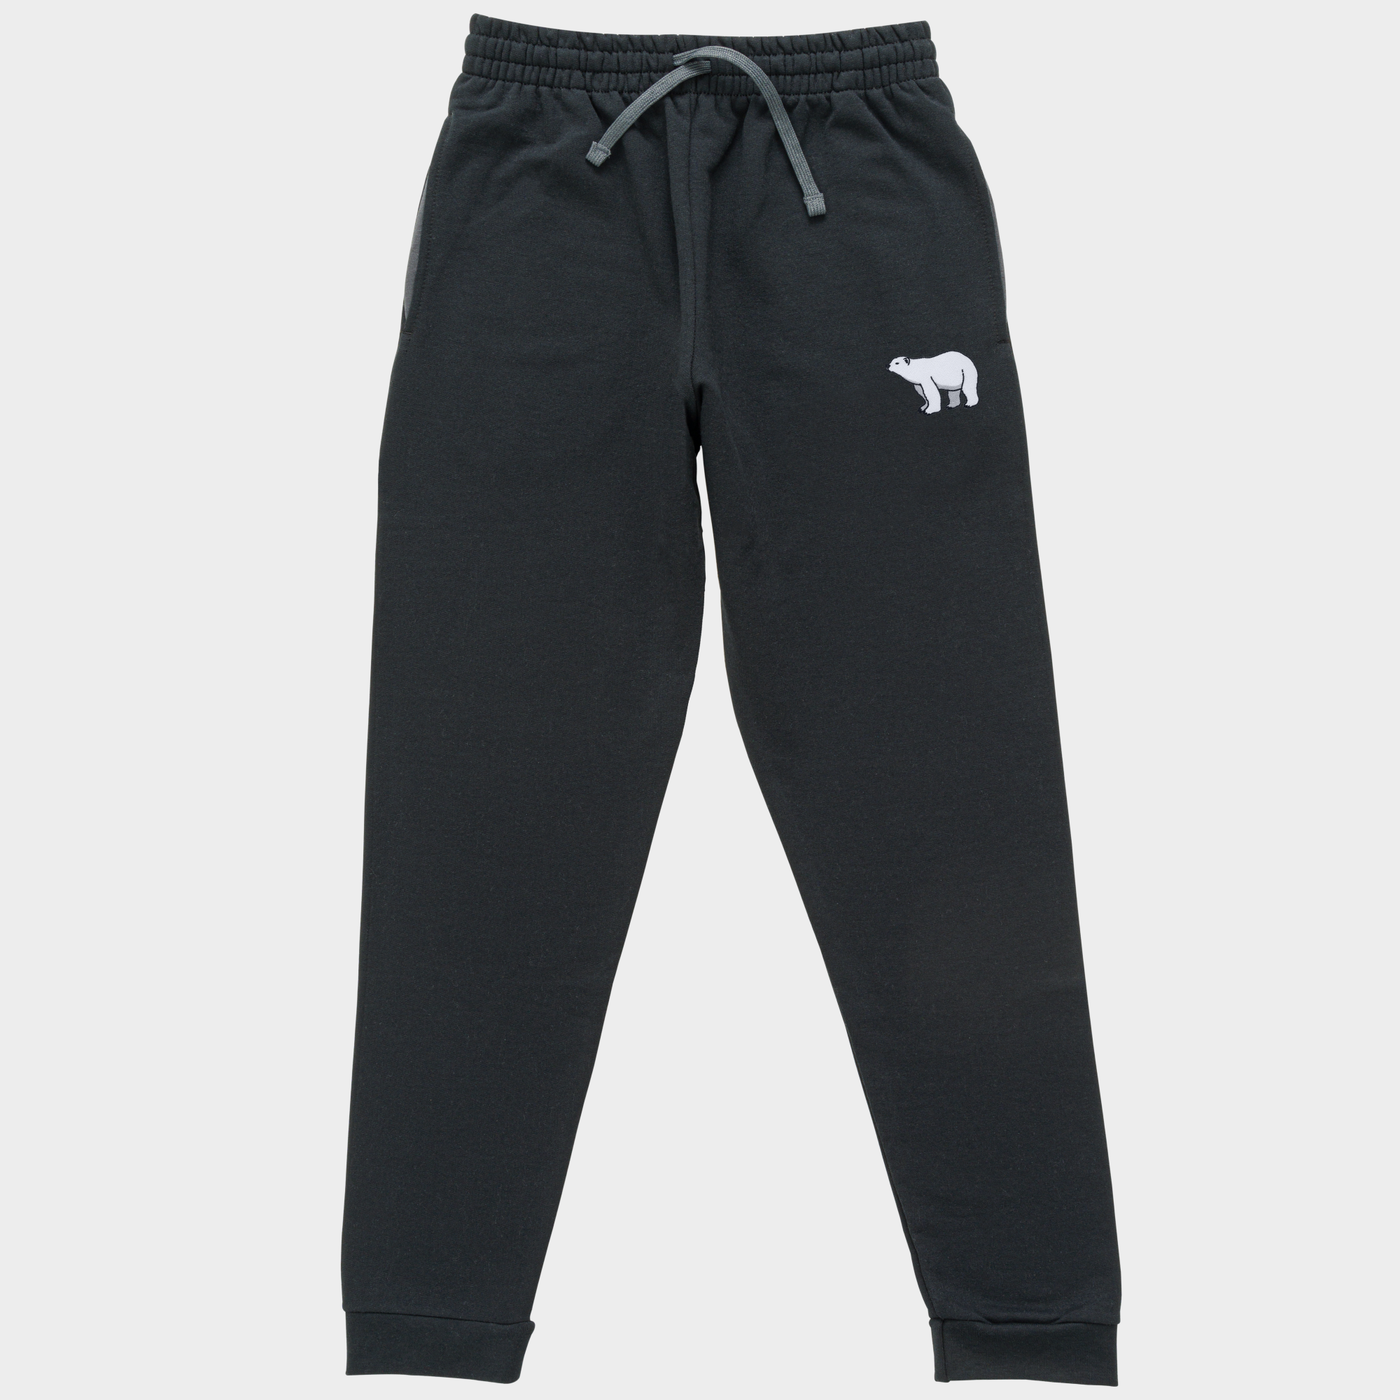 Bobby's Planet Unisex Embroidered Polar Bear Joggers from Arctic Polar Animals Collection in Black Color#color_black